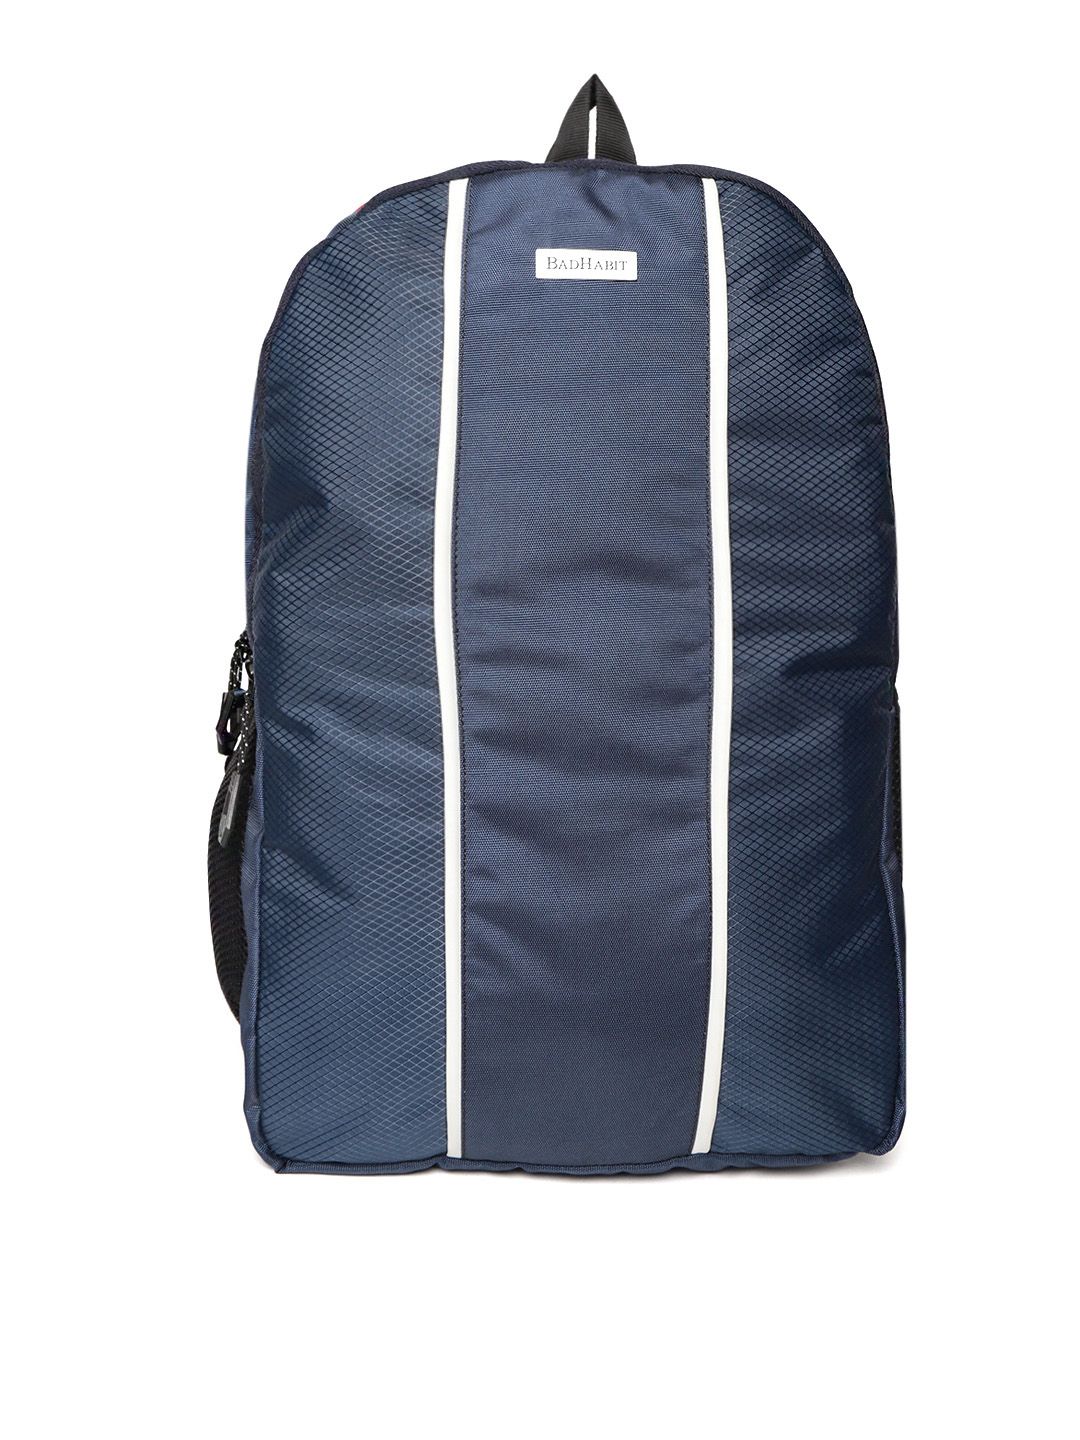 BAD HABIT Unisex Navy Blue Checked Backpack Price in India